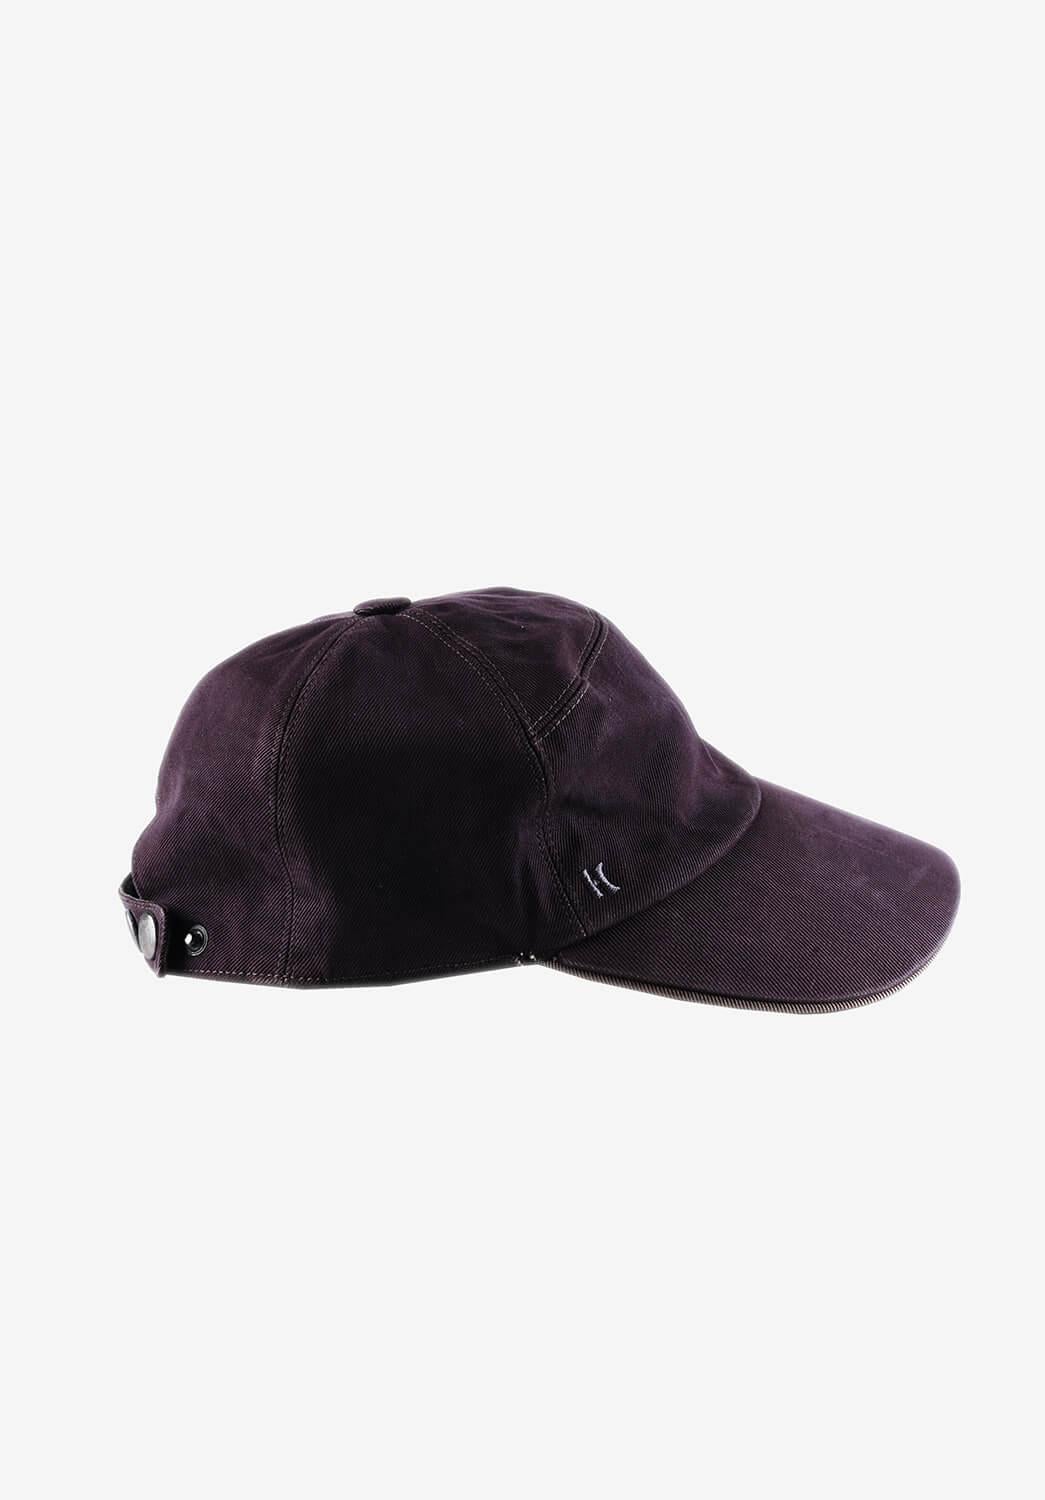 Item for sale is 100% genuine Hermes Men Baseball Cap Hat
Color: Purple
(An actual color may a bit vary due to individual computer screen interpretation)
Material: Fadded tag, cotton
Tag size: 57/ Small
This hat is great quality item. Rate 8.5 of